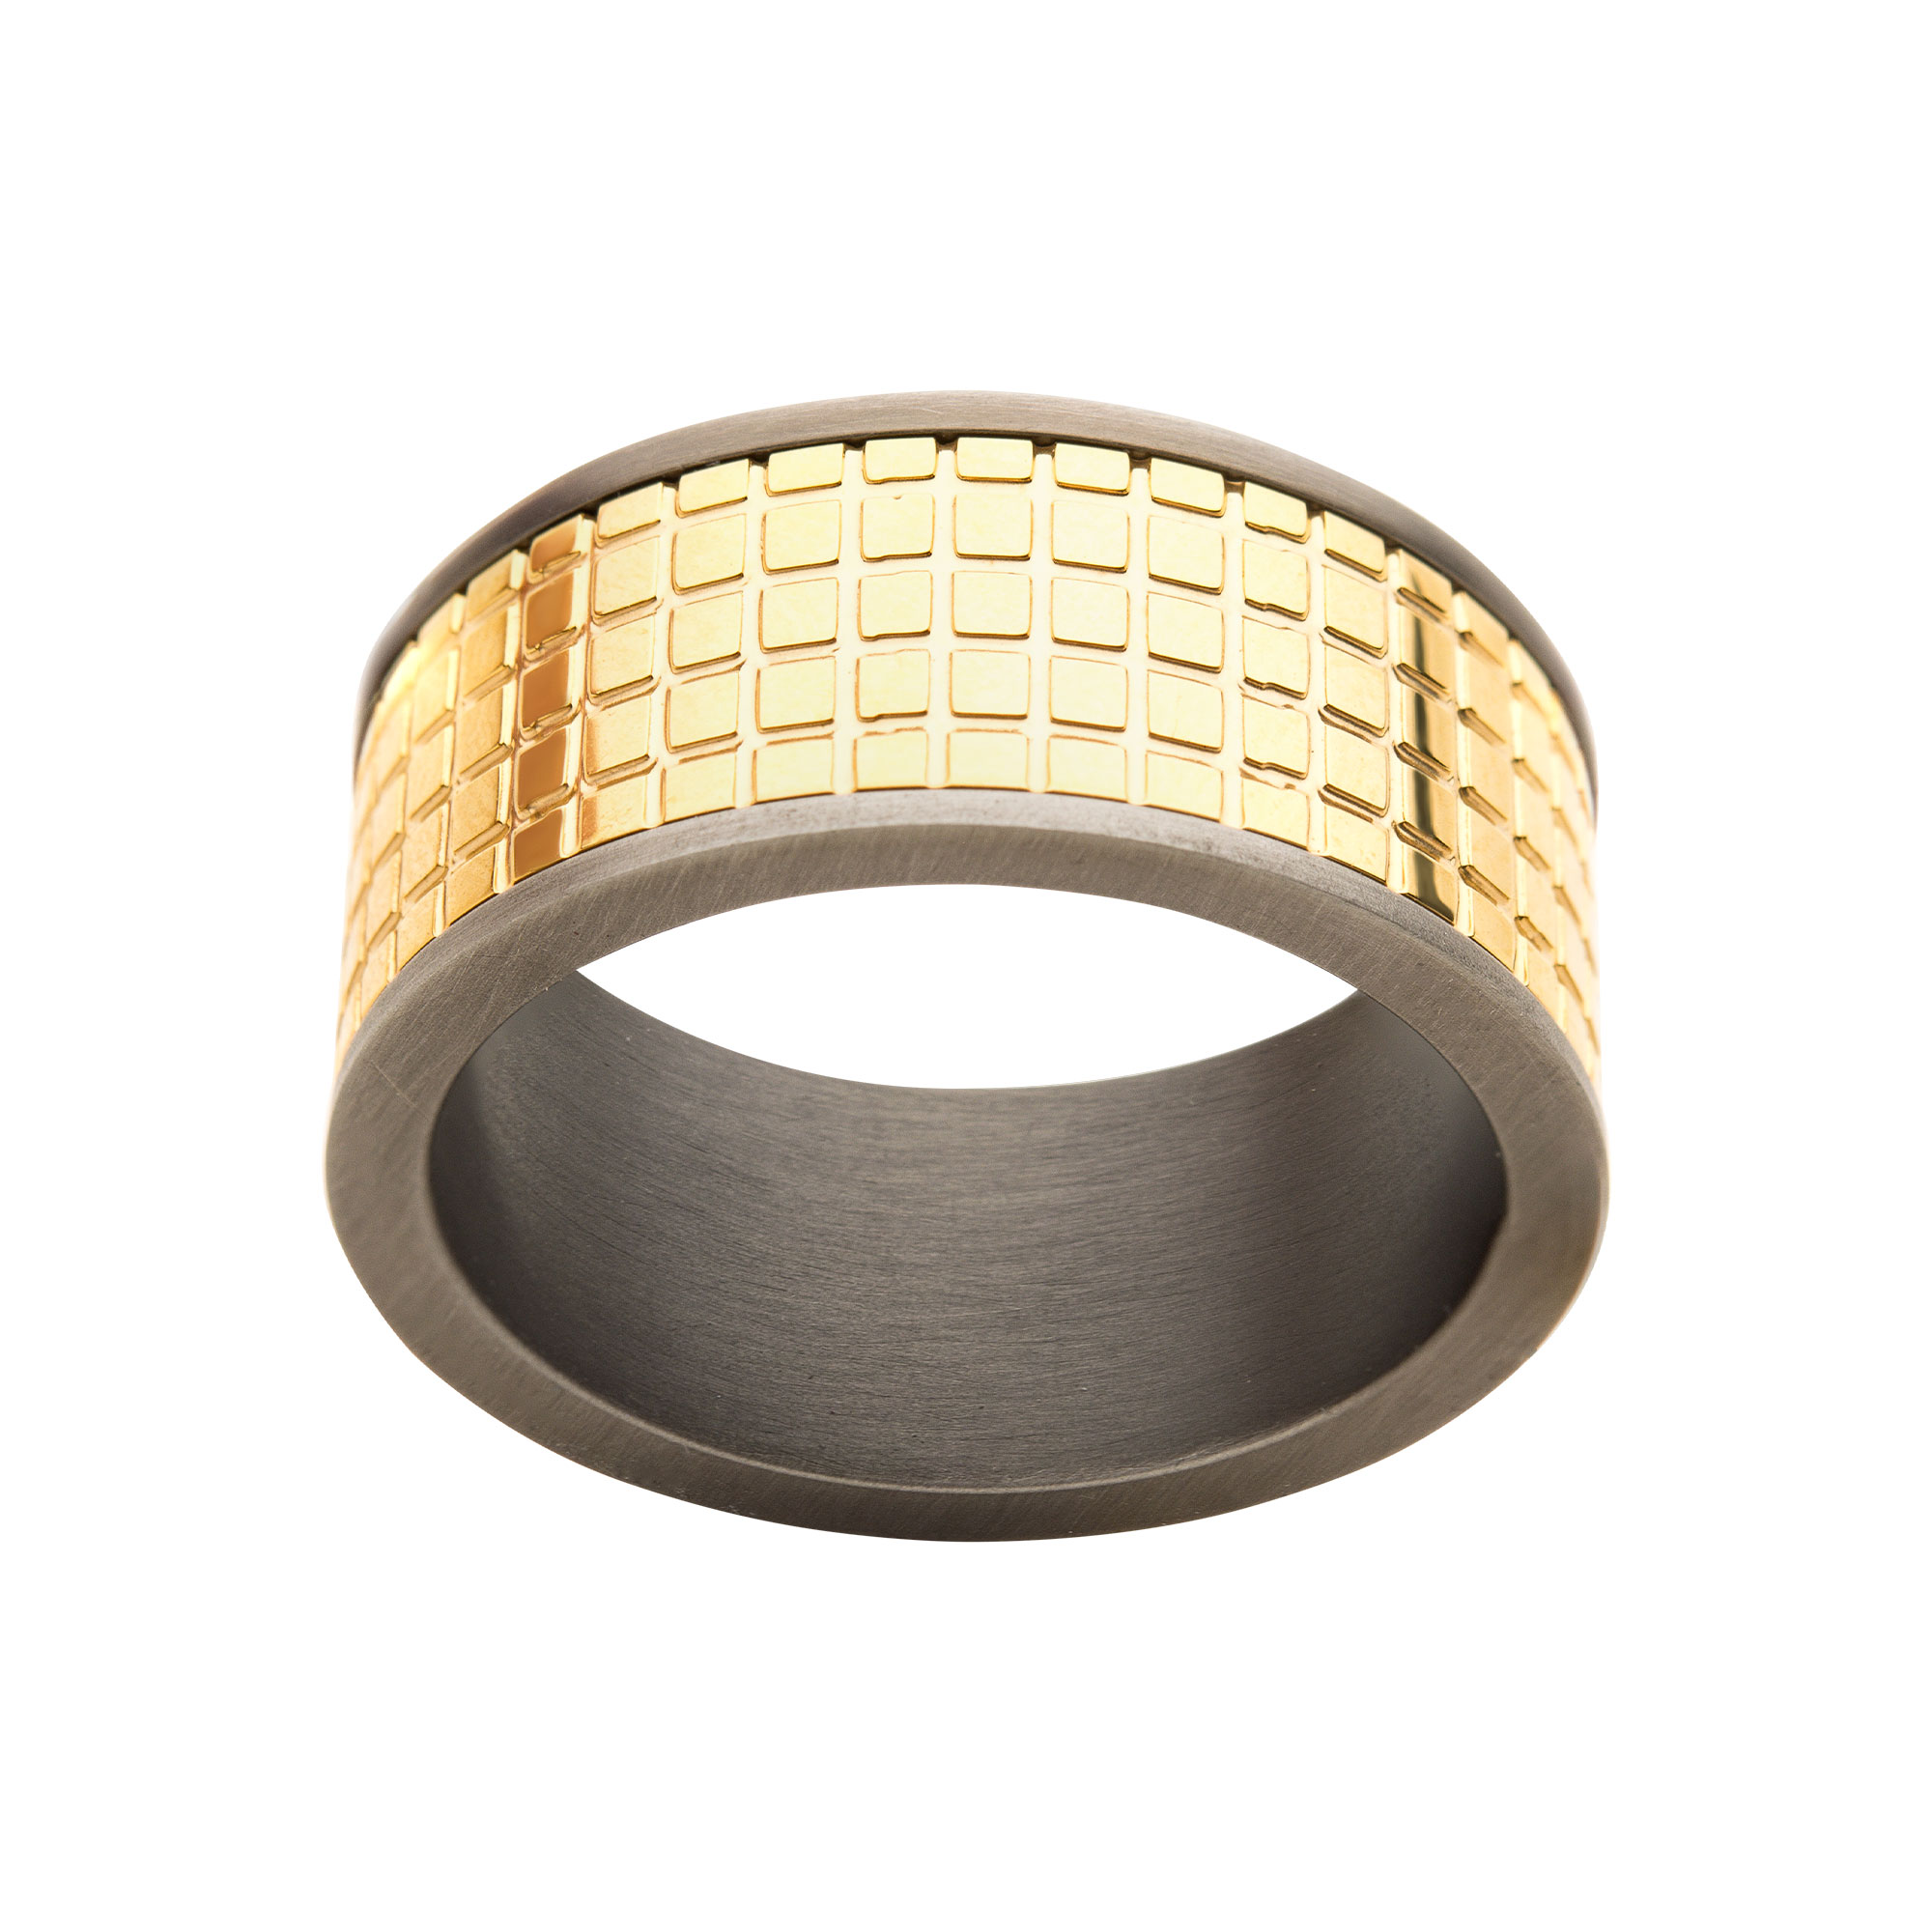 Gun Metal Plated with 18K Gold Plated Grid Inlay Ring Image 2 Enchanted Jewelry Plainfield, CT